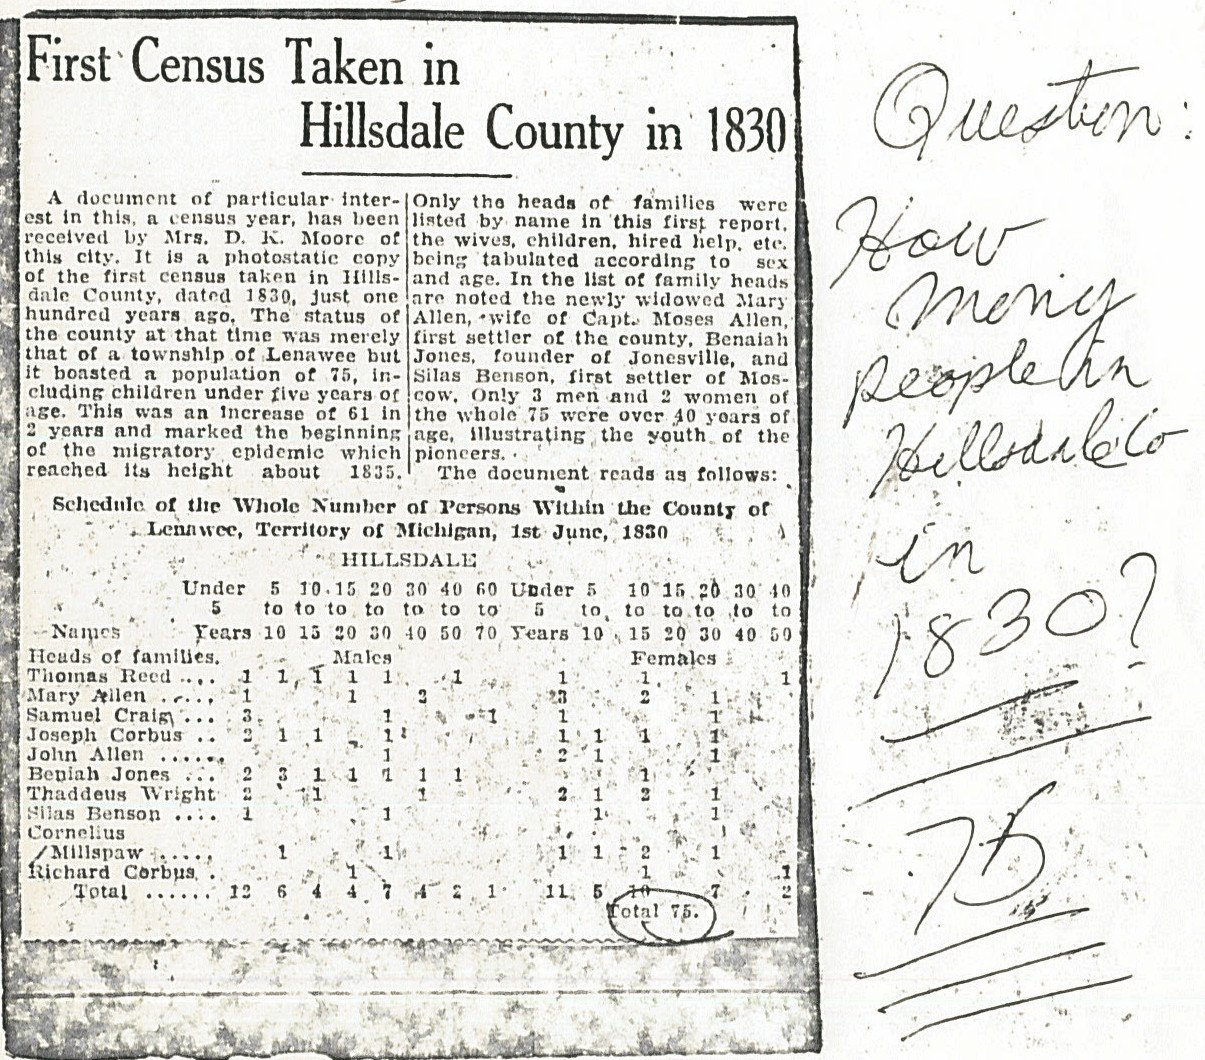  1830 Hillsdale County Census 